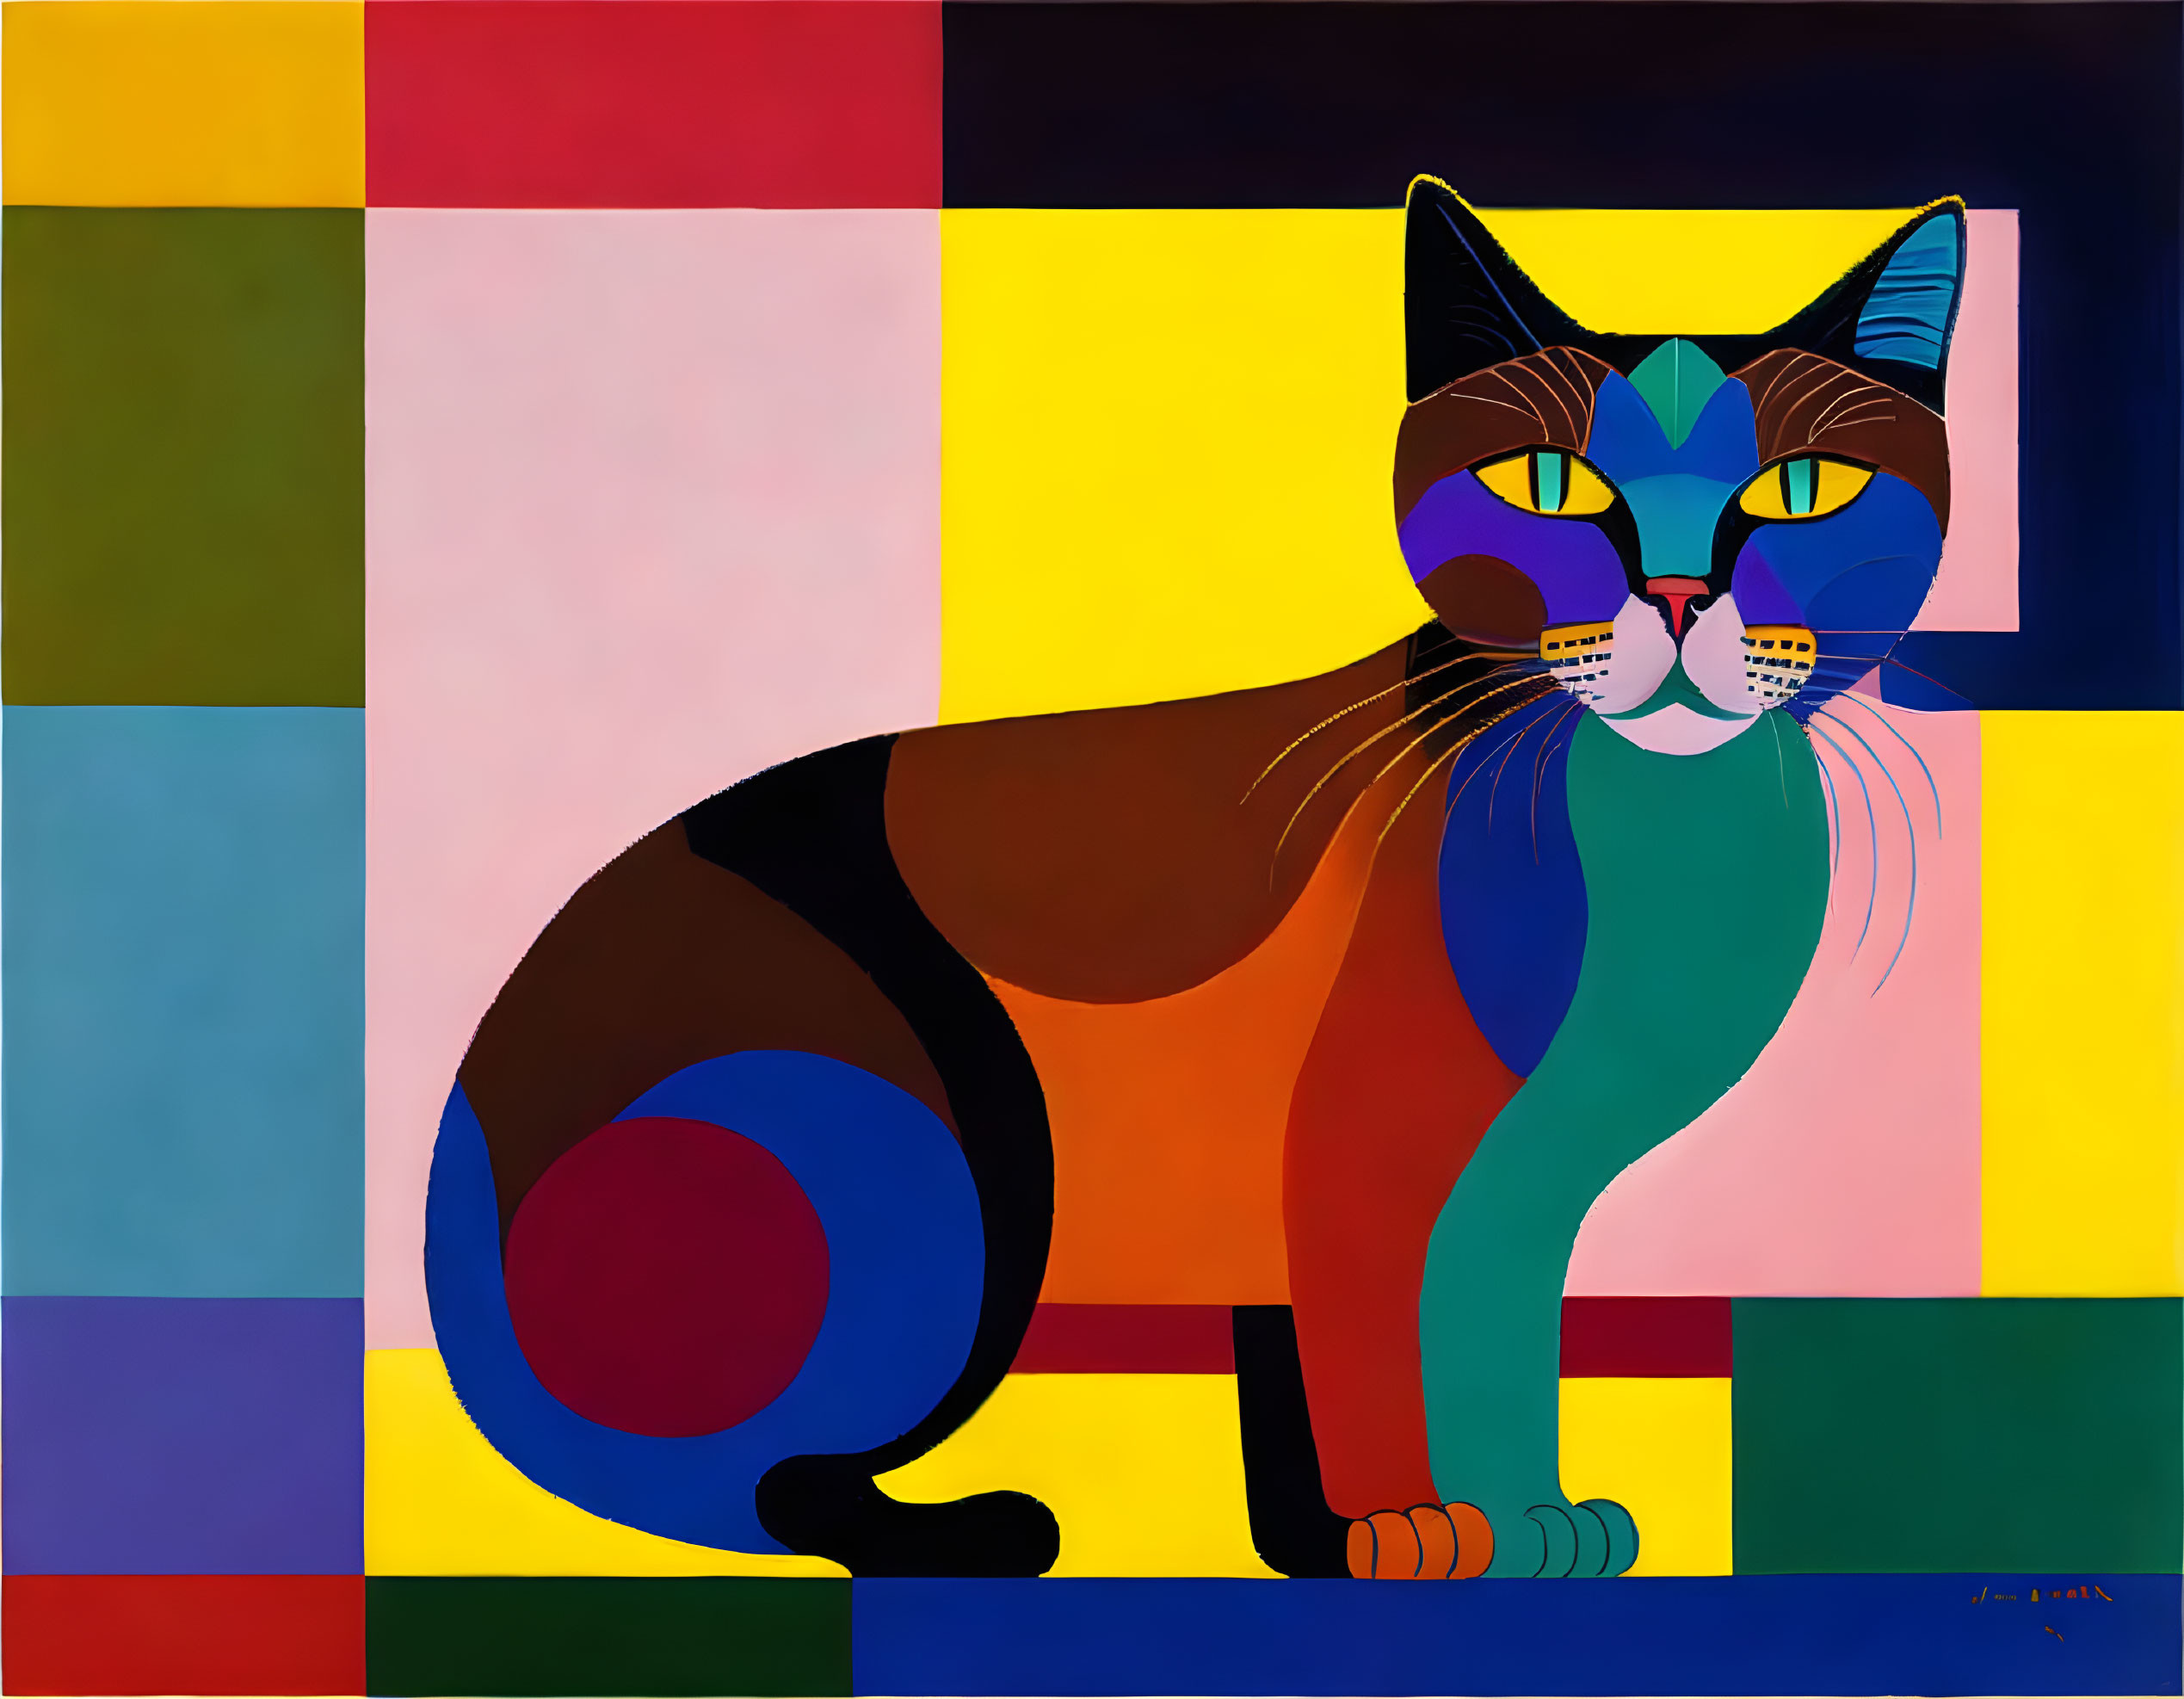 Abstract Cat Painting with Multicolored Face on Geometric Background